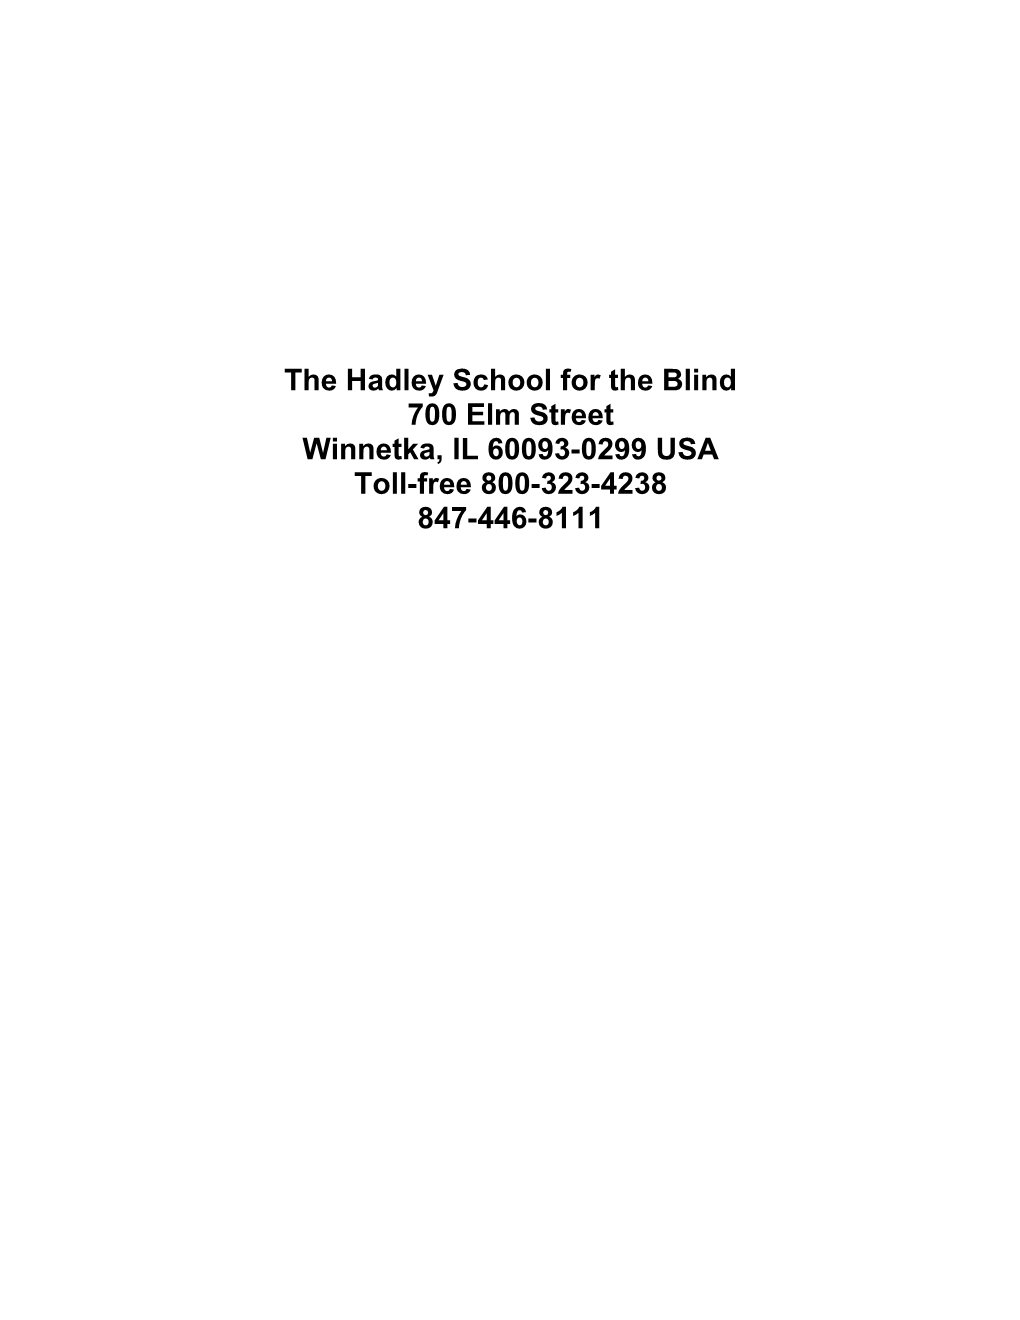 The Hadley School For The Blind